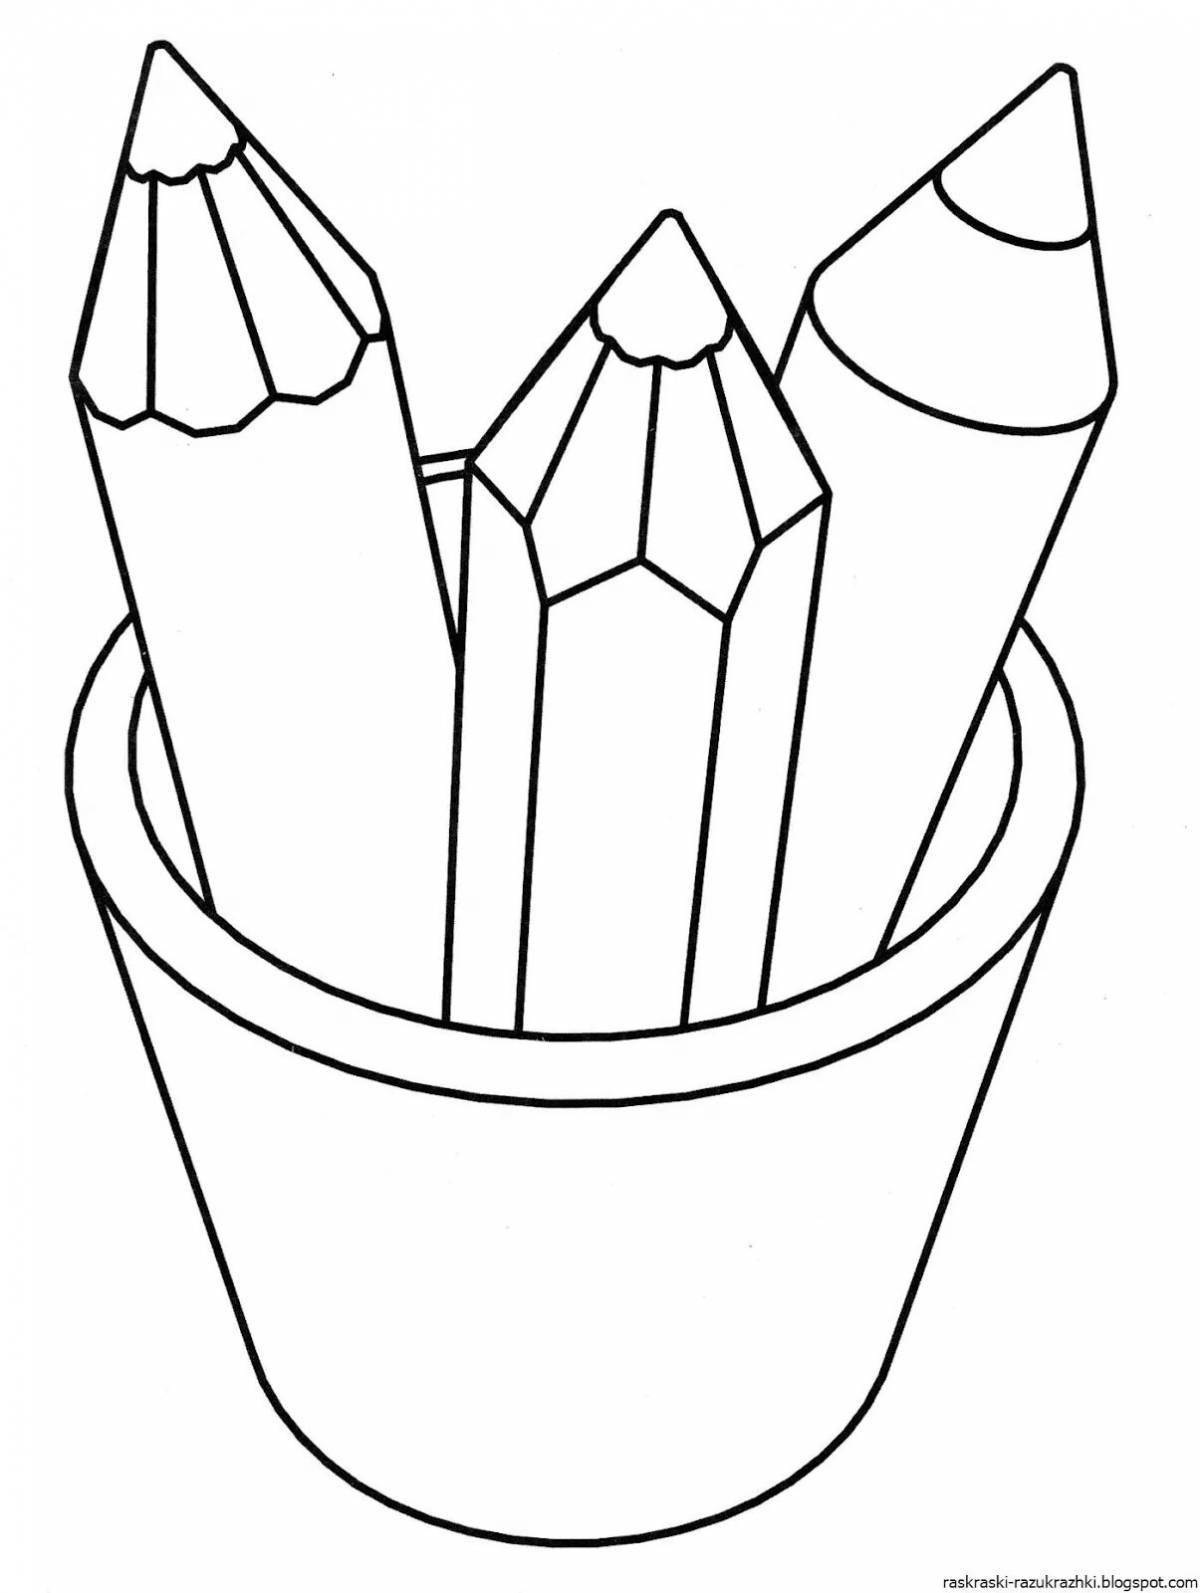 Bright glass coloring page with crayons